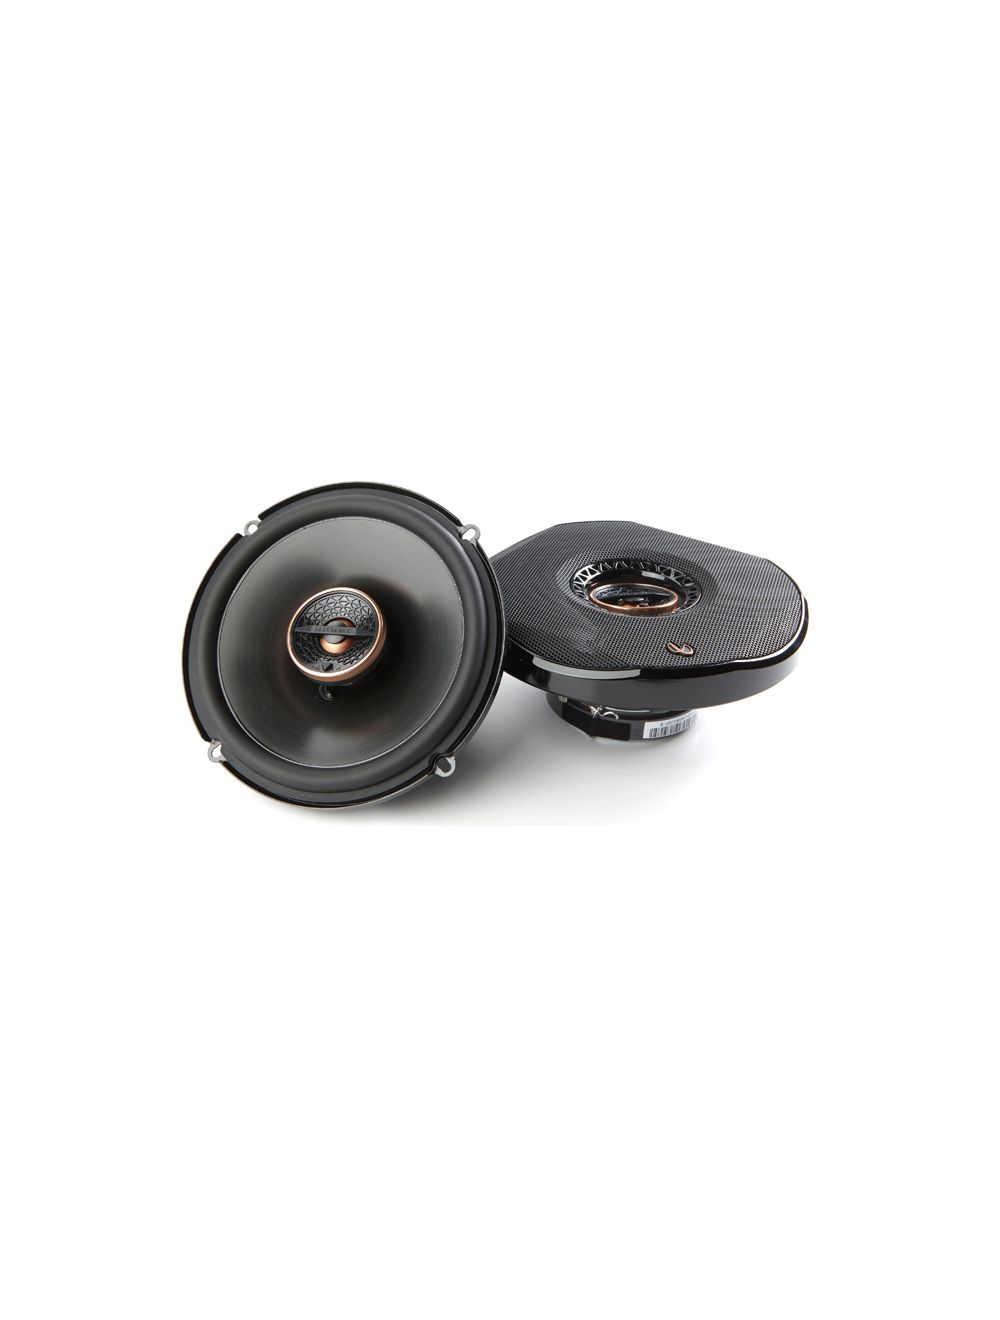 Car Speaker Size Replacement fits 2009-2012 for Hyundai Elantra Touring (not amplified)